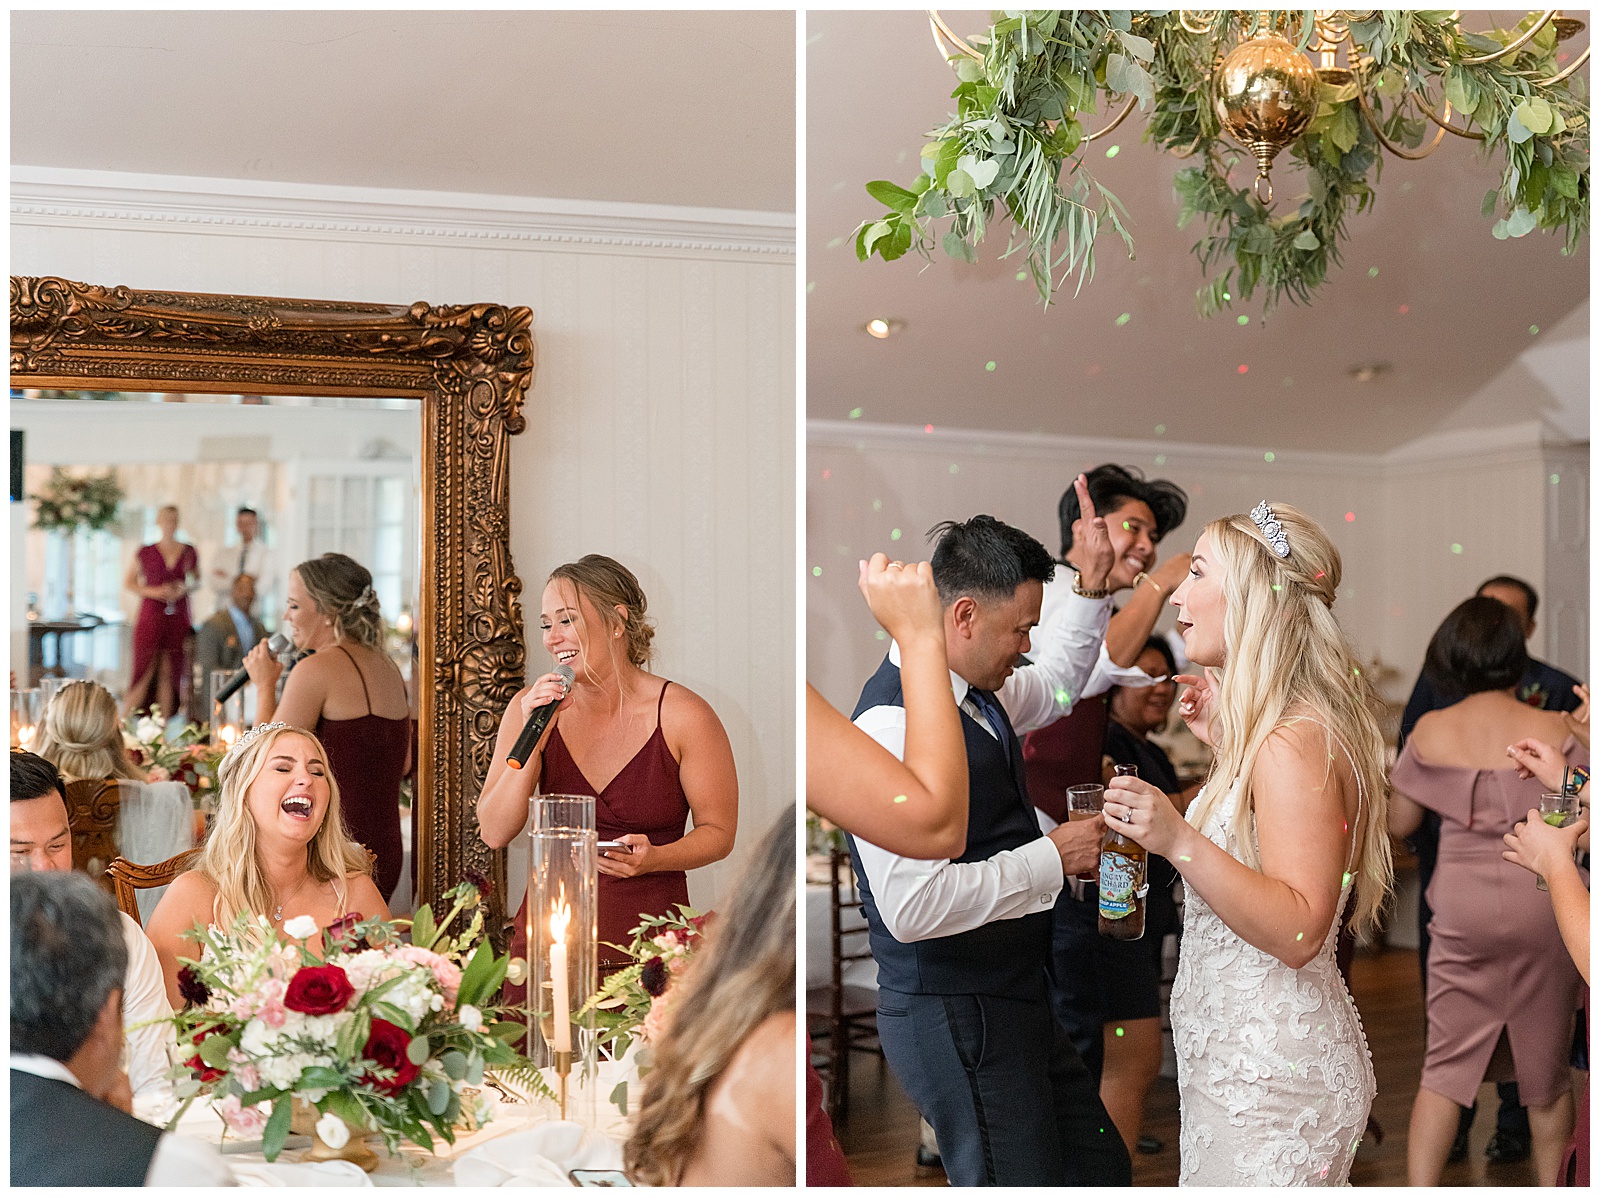 bride and groom dancing with guests during indoor reception with greenery hanging from light above them